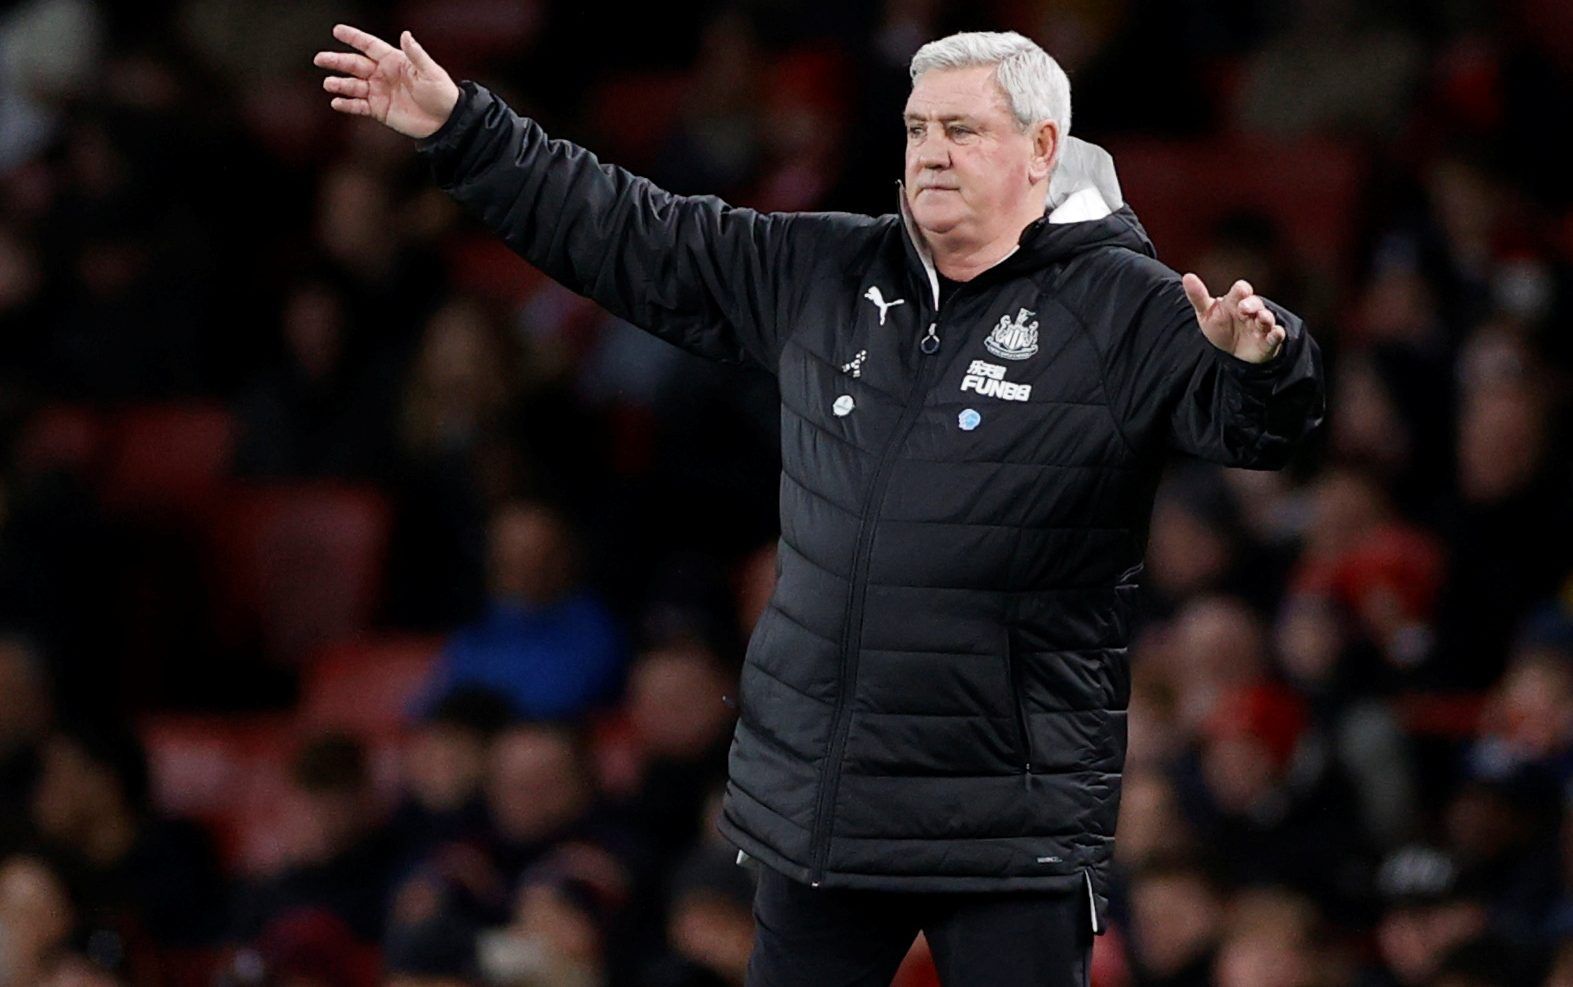 Soccer Football - Premier League - Arsenal v Newcastle United - Emirates Stadium, London, Britain - February 16, 2020   Newcastle United manager Steve Bruce reacts  Action Images via Reuters/John Sibley  EDITORIAL USE ONLY. No use with unauthorized audio, video, data, fixture lists, club/league logos or 